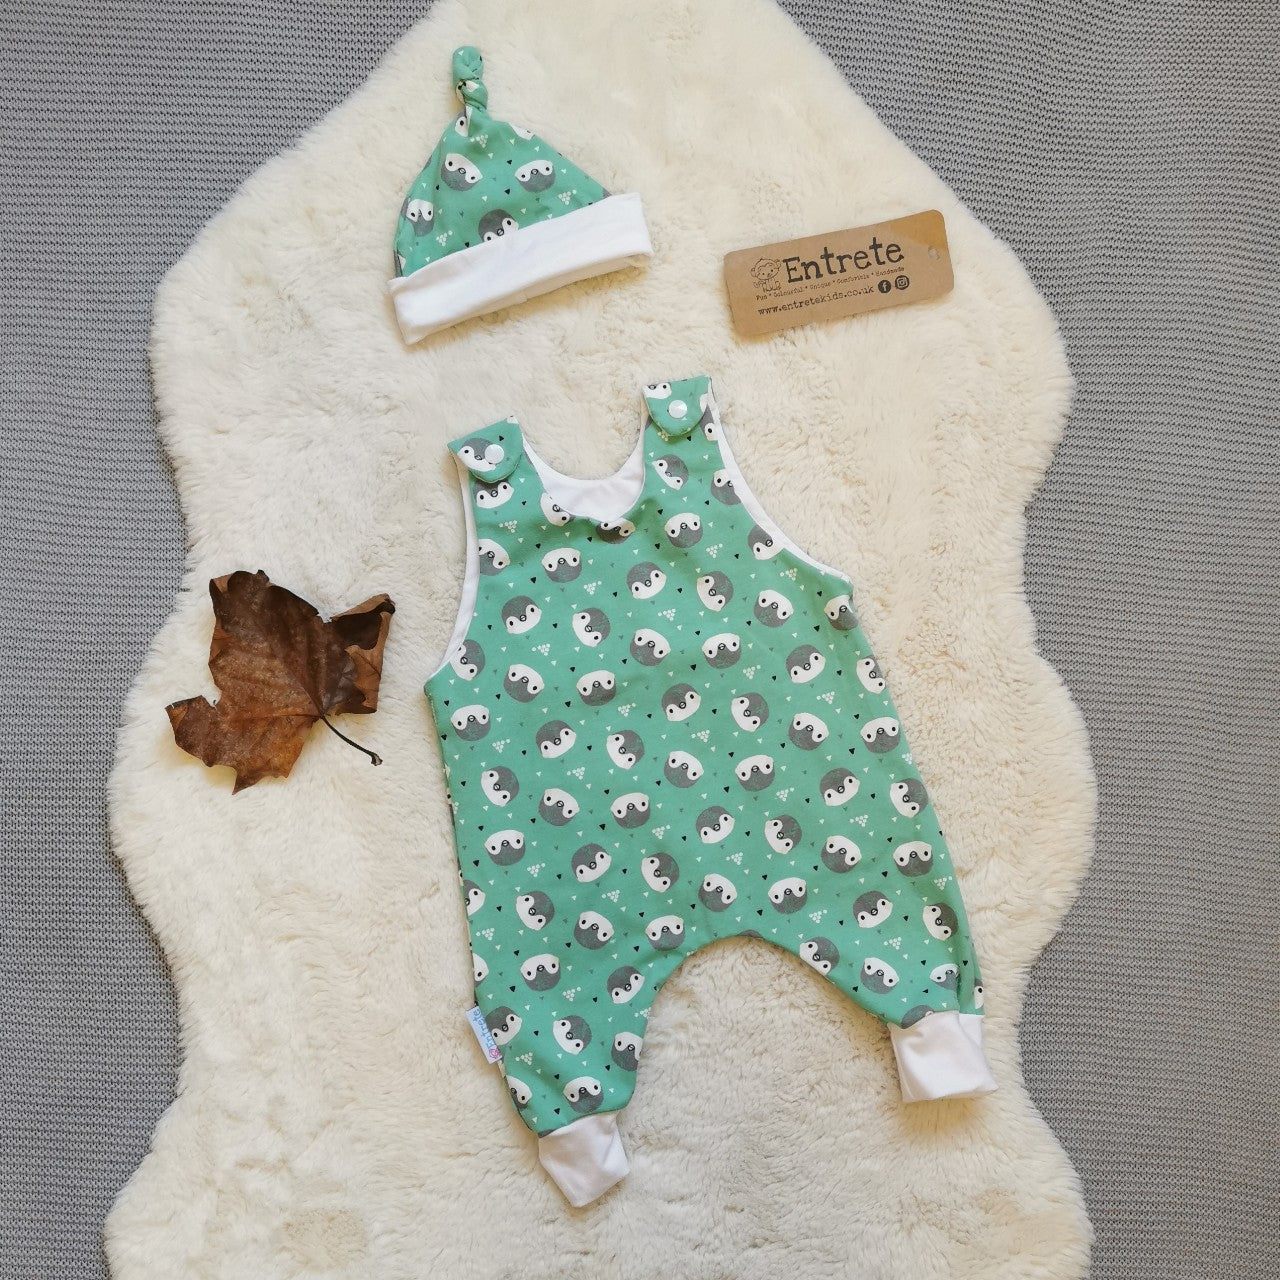 A romper gift set shown in mint penguins for demonstration purposes, your gift set will be handmade in cerise rainbow striped cotton jersey.